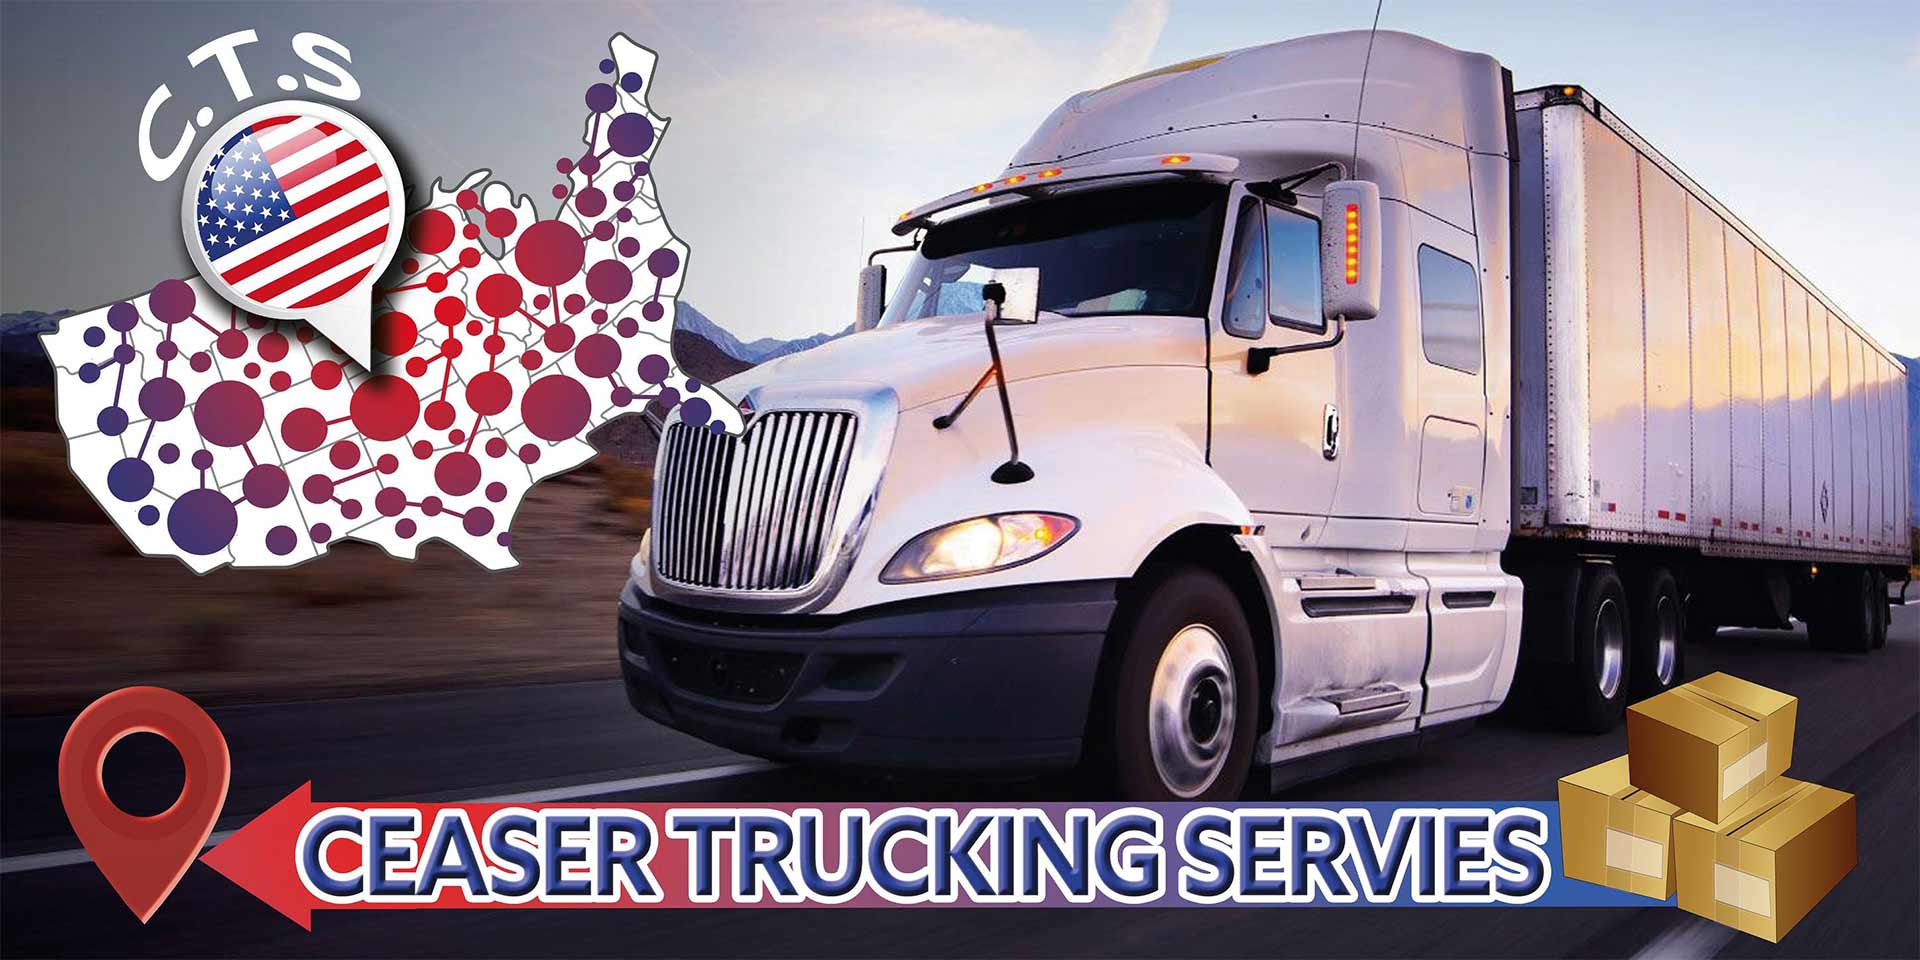 Livonia Trucking Services, Trucking Company and Freight Forwarding Services